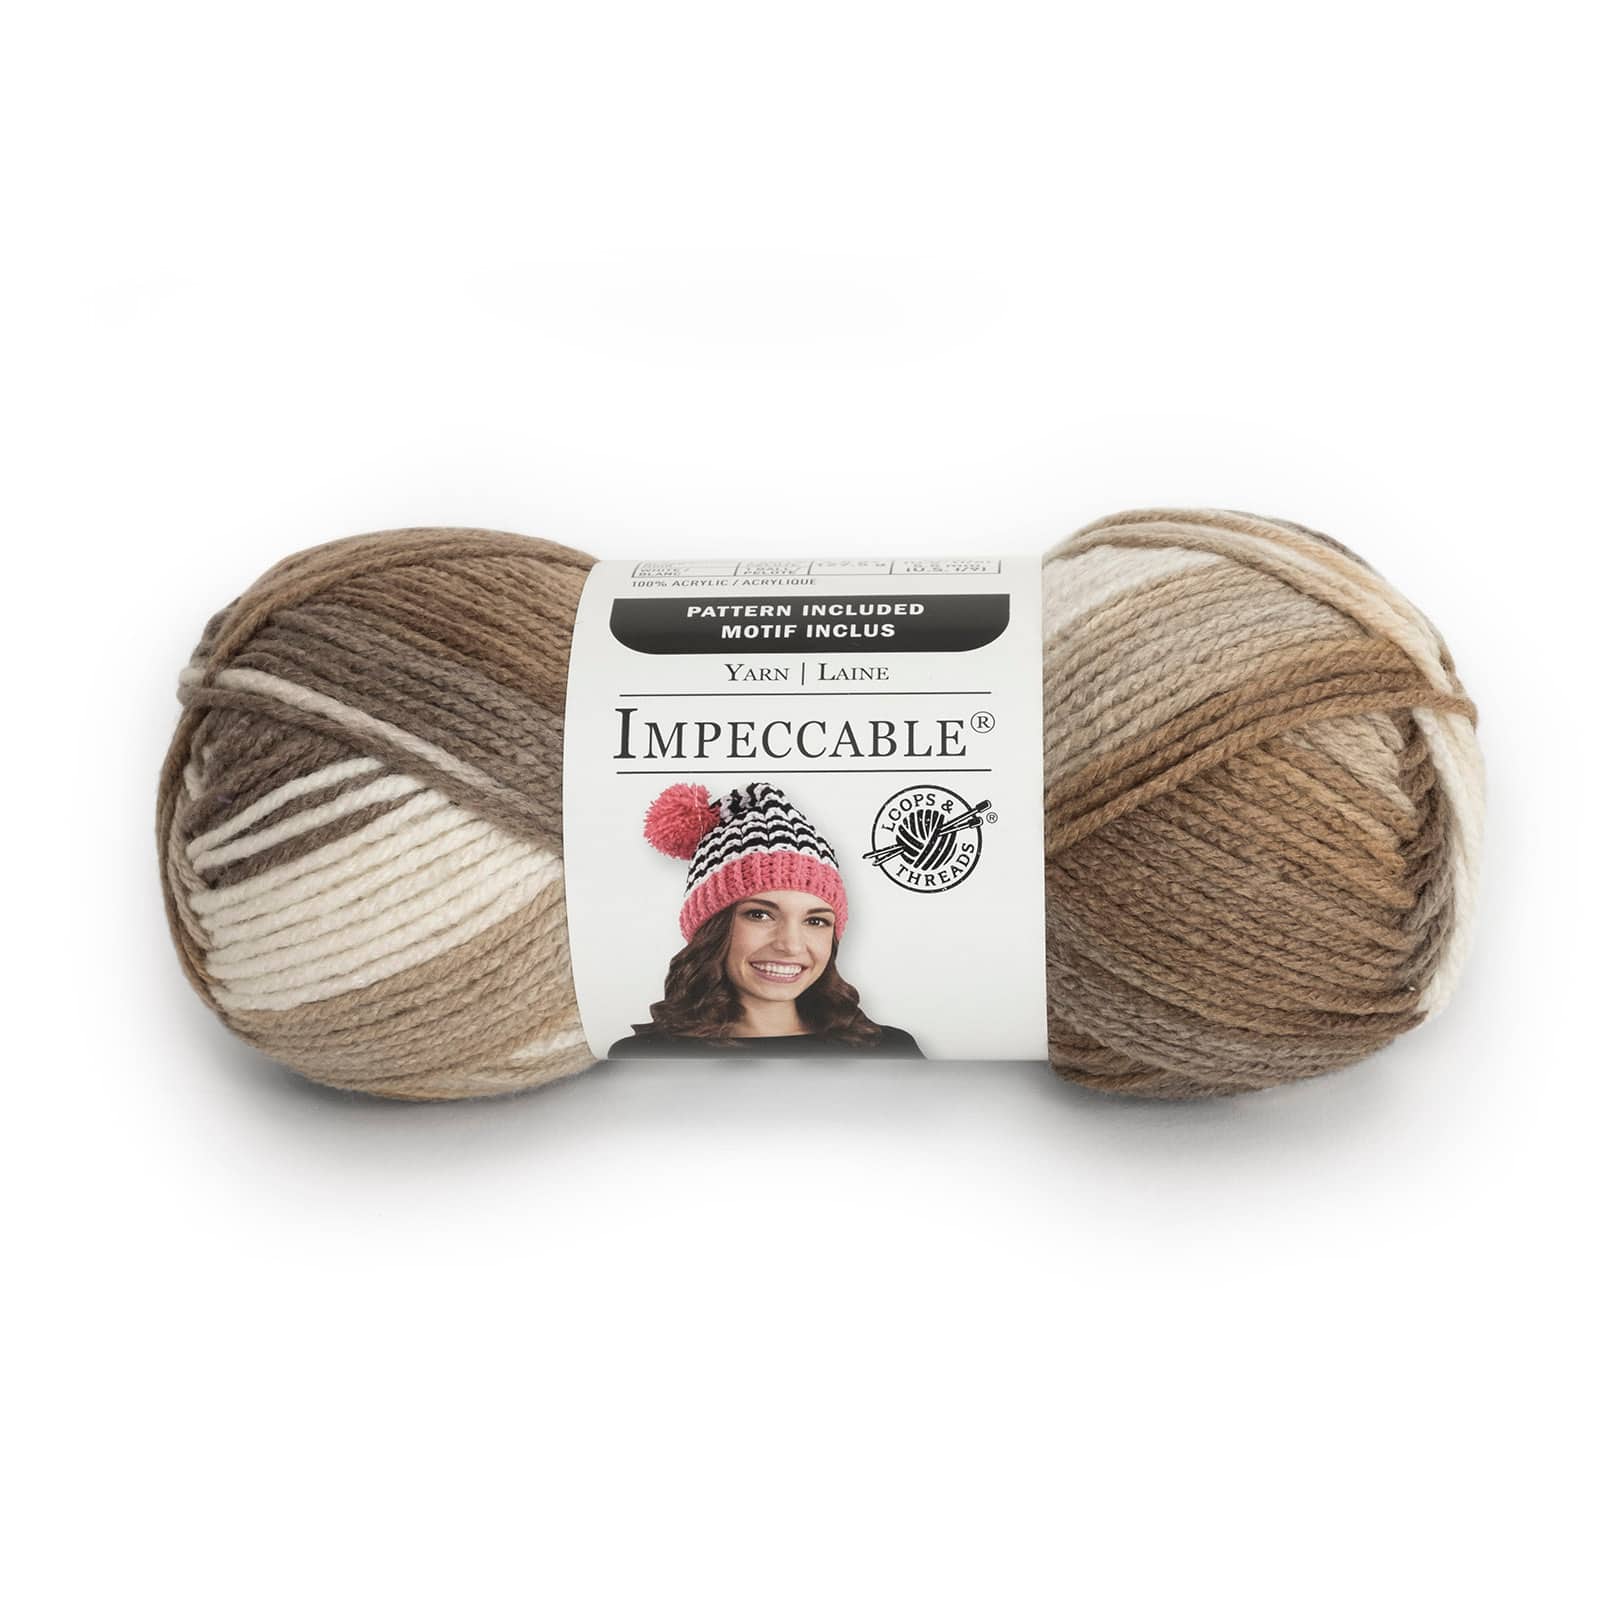 Loops & Threads Impeccable Yarn 3.5 oz. One Ball - Tropical Storm